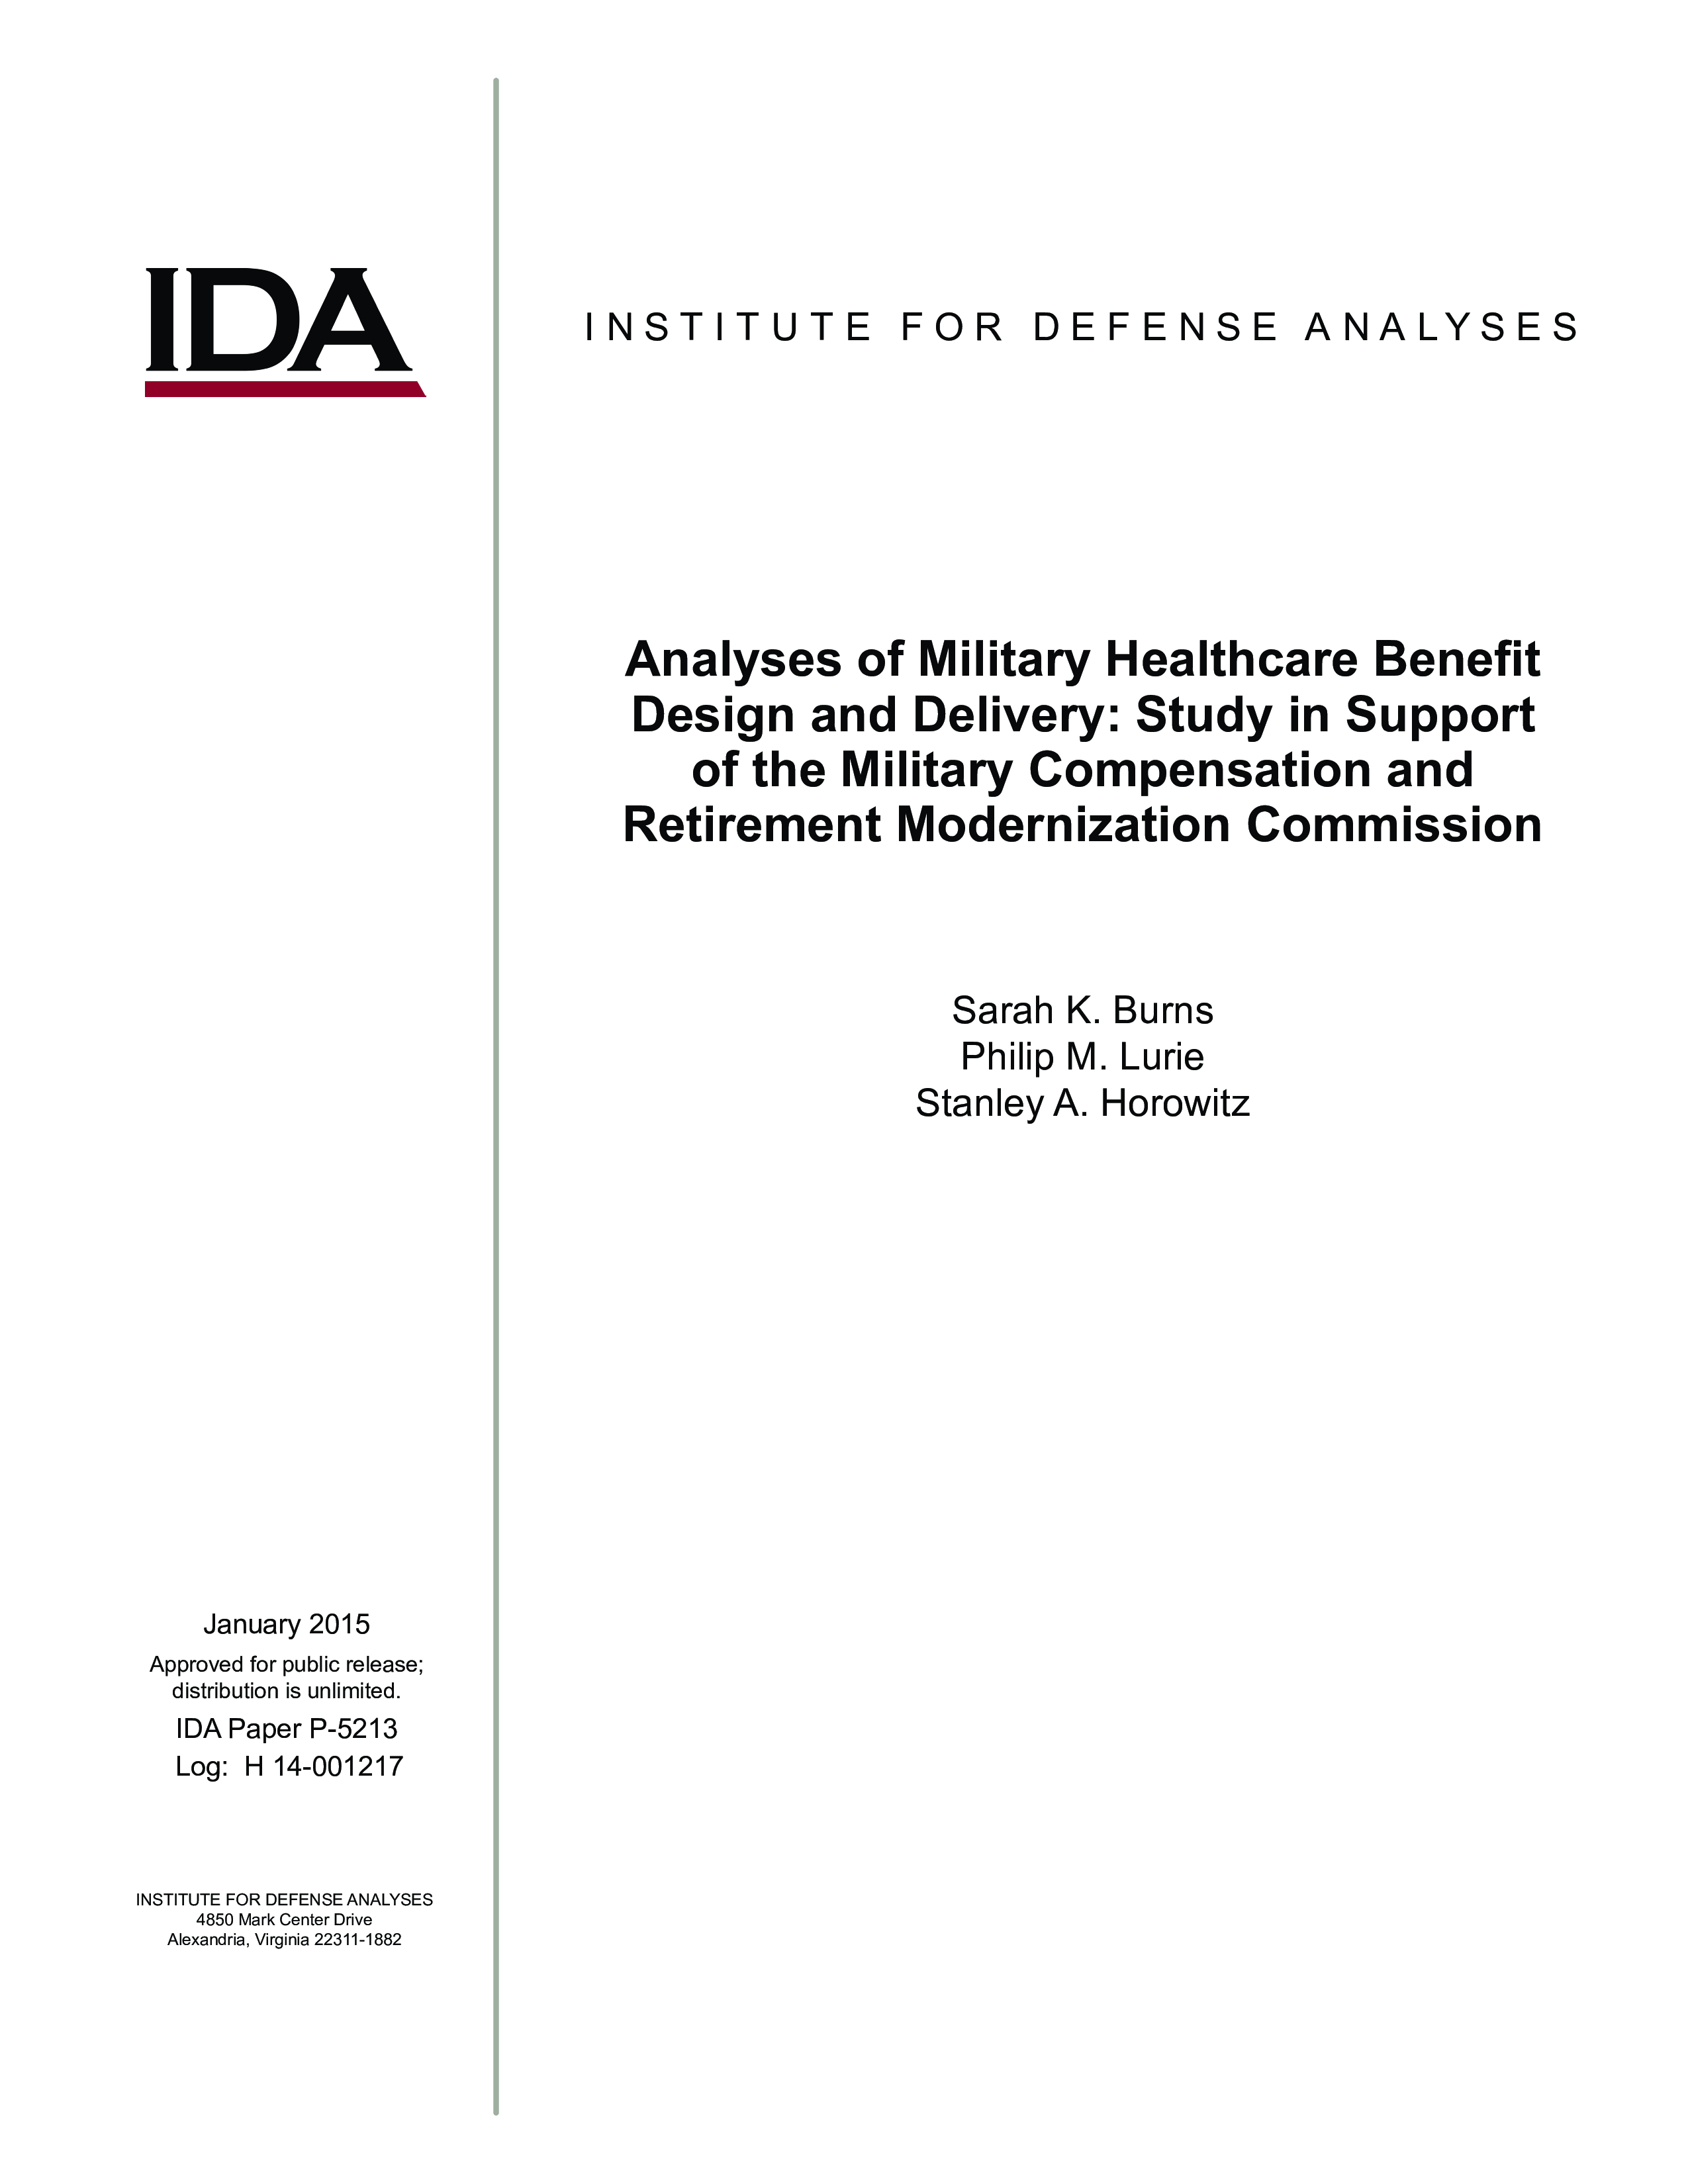 Analyses of Military Healthcare Benefit Design and Delivery: Study in Support of the Military Compensation and Retirement Modernization Commission